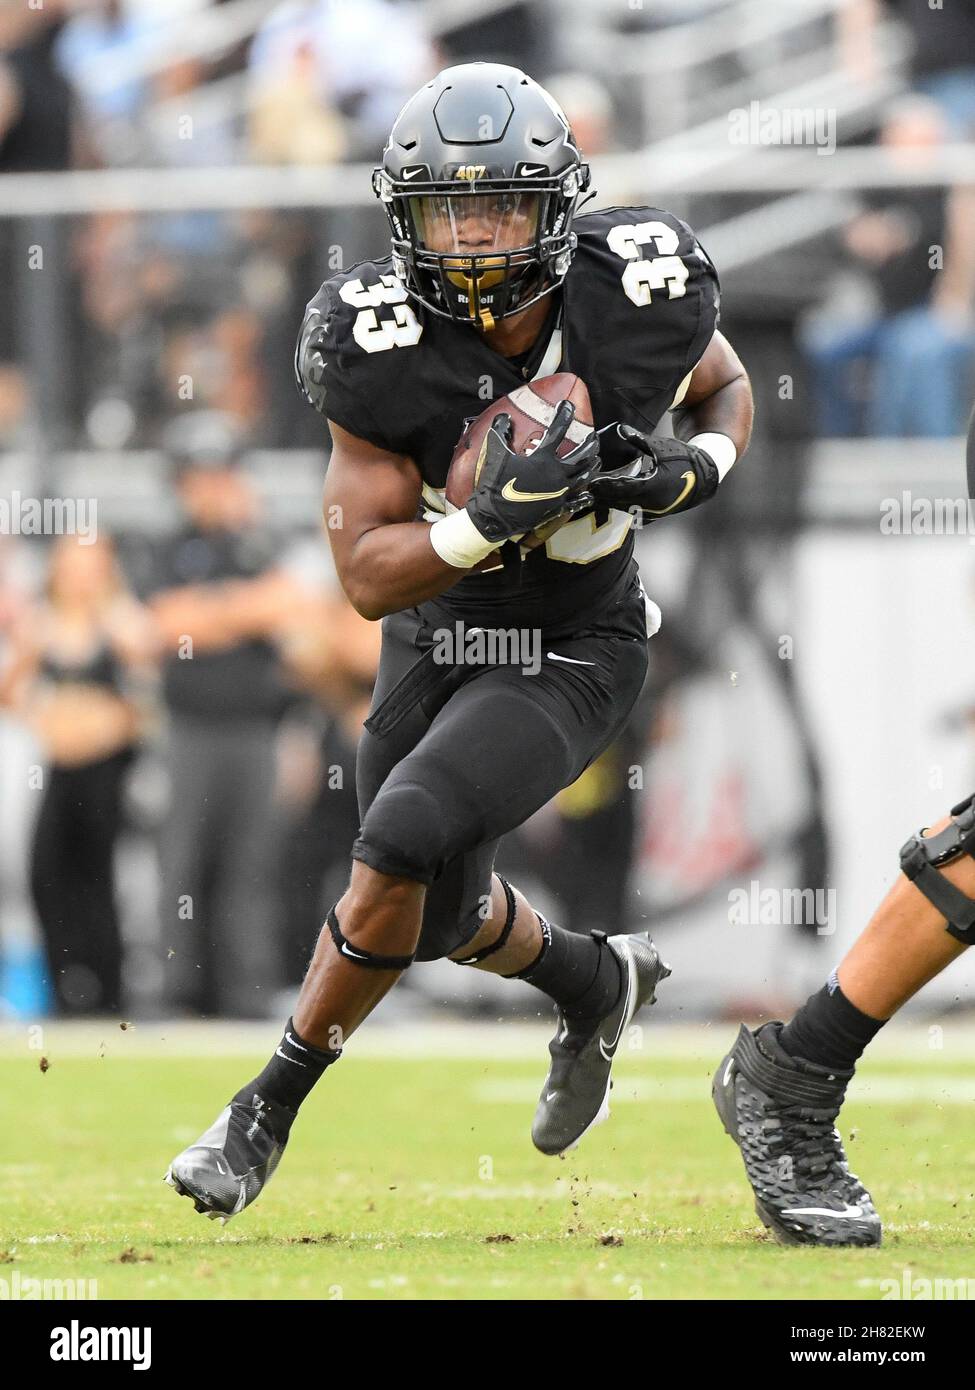 Orlando, FL, USA. 26th Nov, 2021. Central Florida running back Trillion Coles (33) during 1st half NCAA football game between the USF Bulls and the UCF Knights at the Bounce House in Orlando, Fl. Romeo T Guzman/Cal Sport Media/Alamy Live News Stock Photo